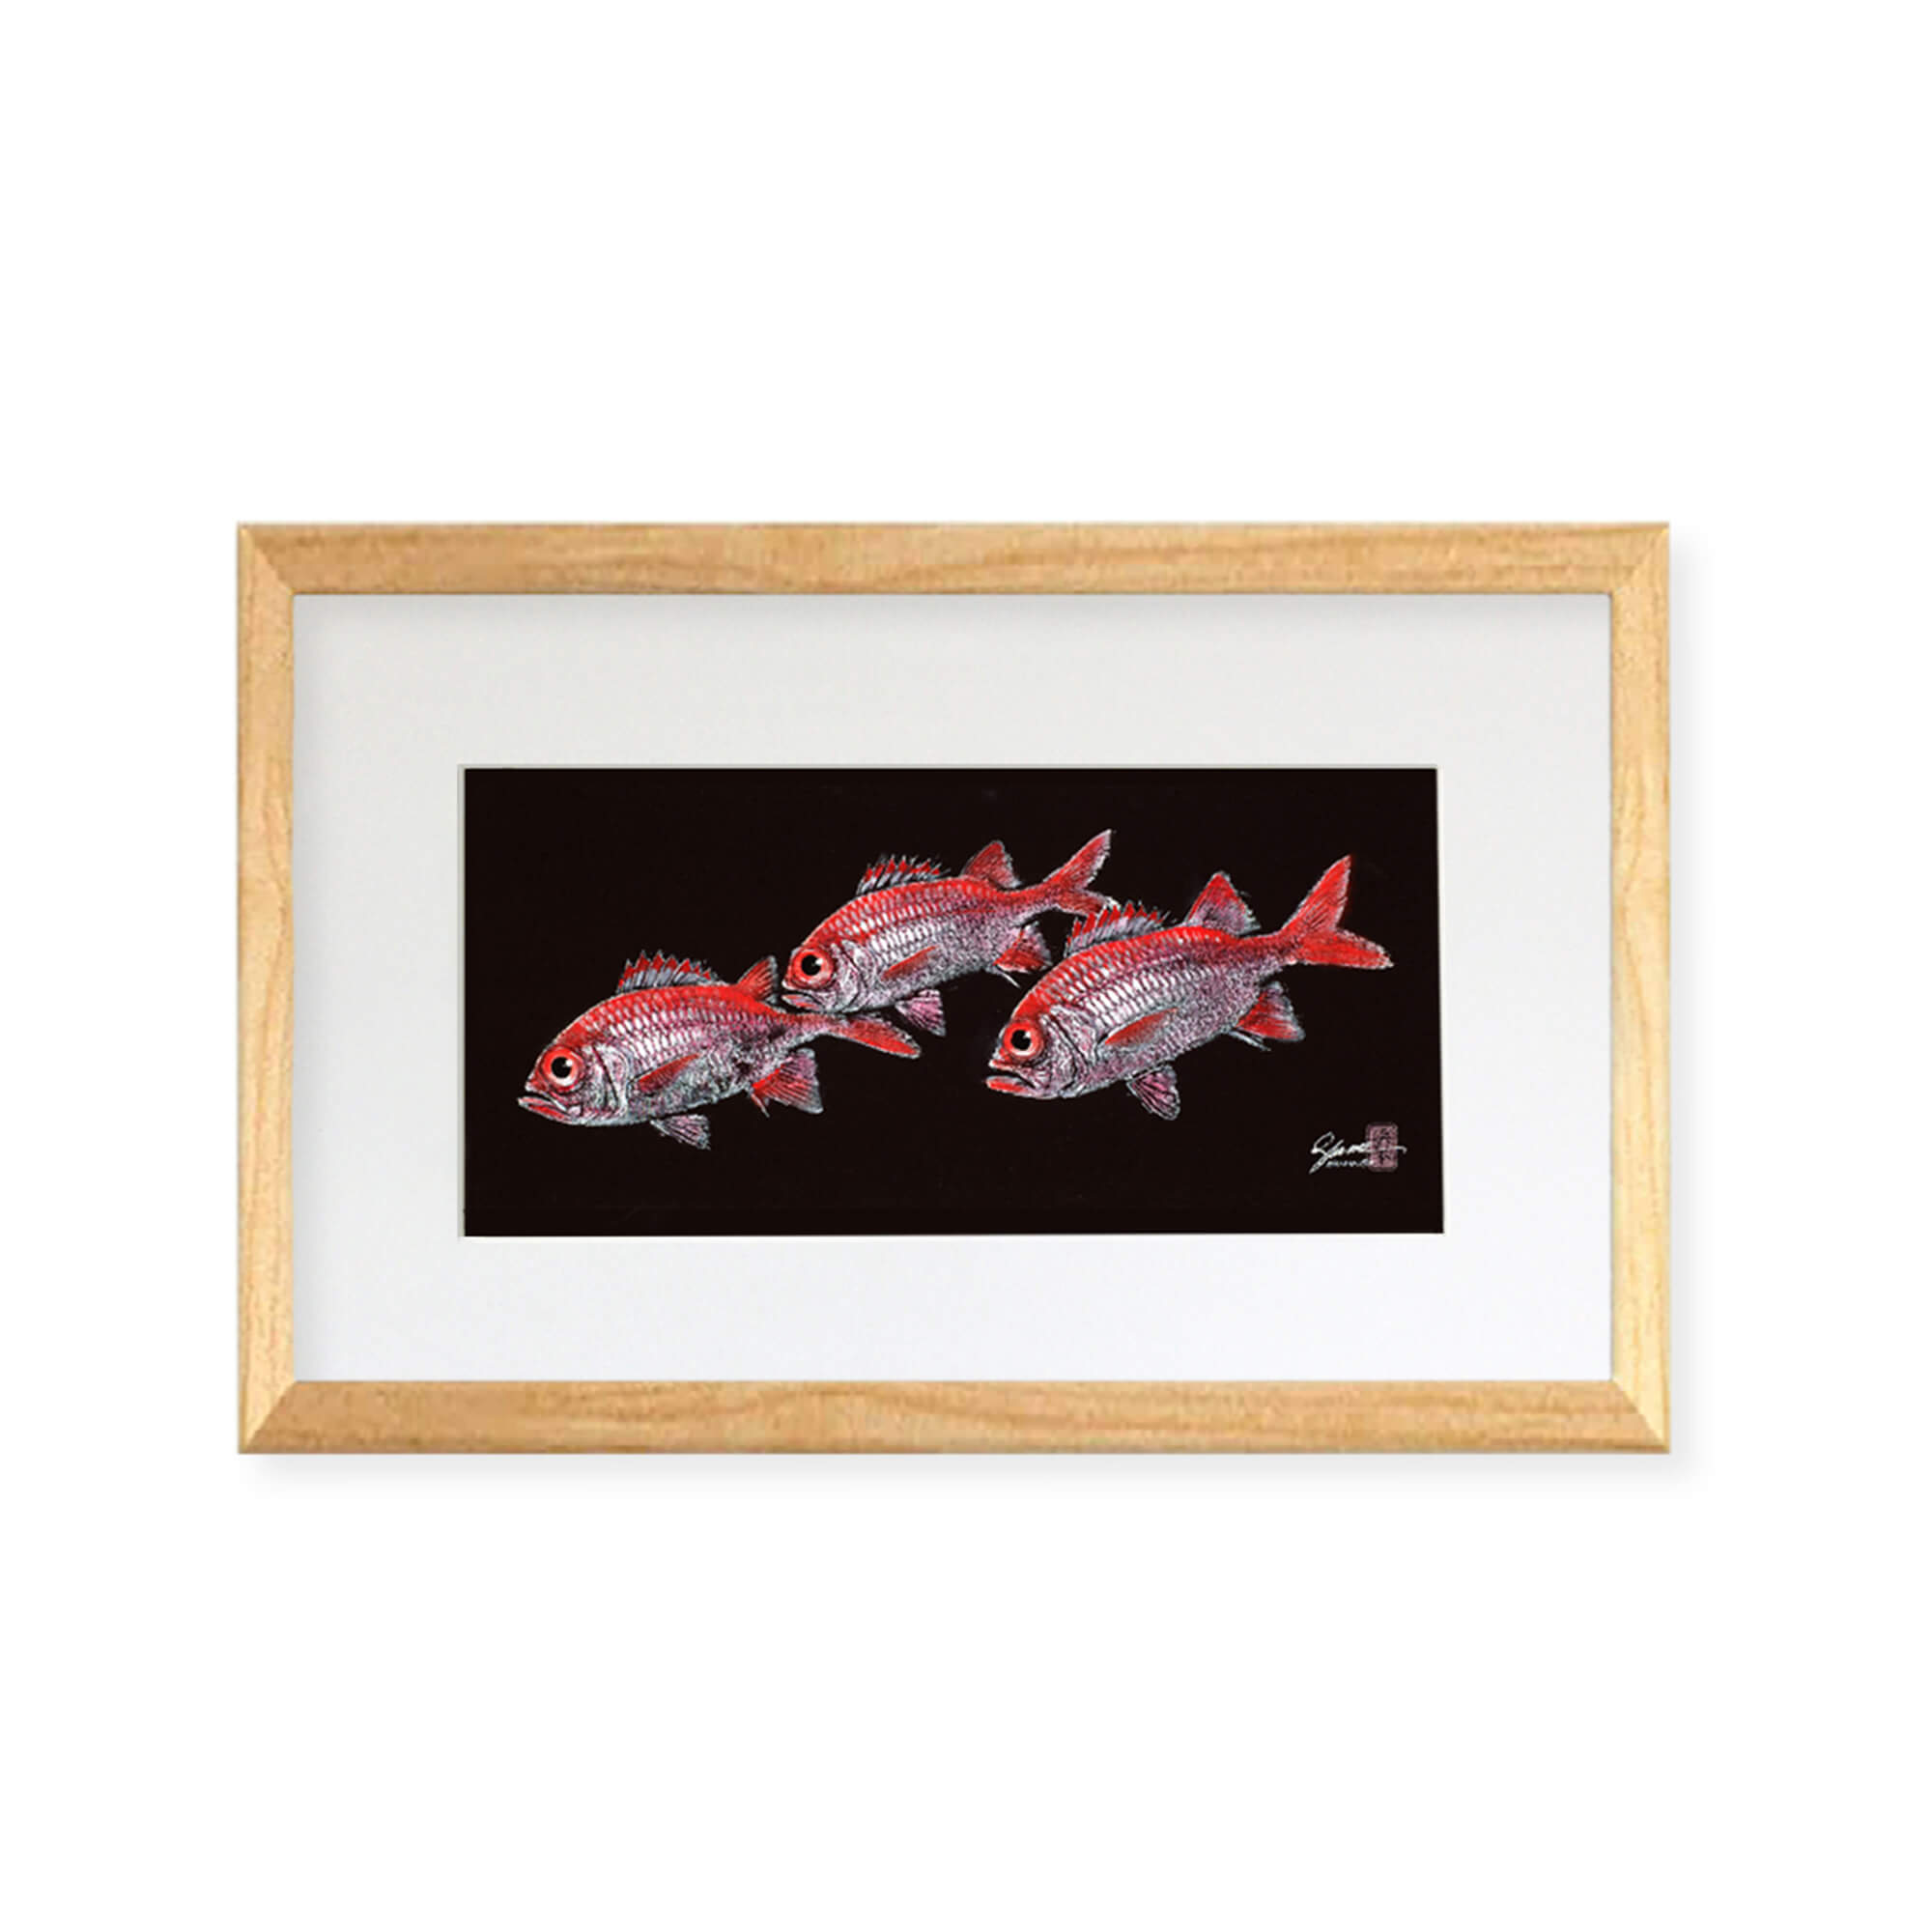 Framed matted print of Menpachi (also known as Flagtails and Soldierfish) by Hawaii gyotaku artist Shane Hamamoto